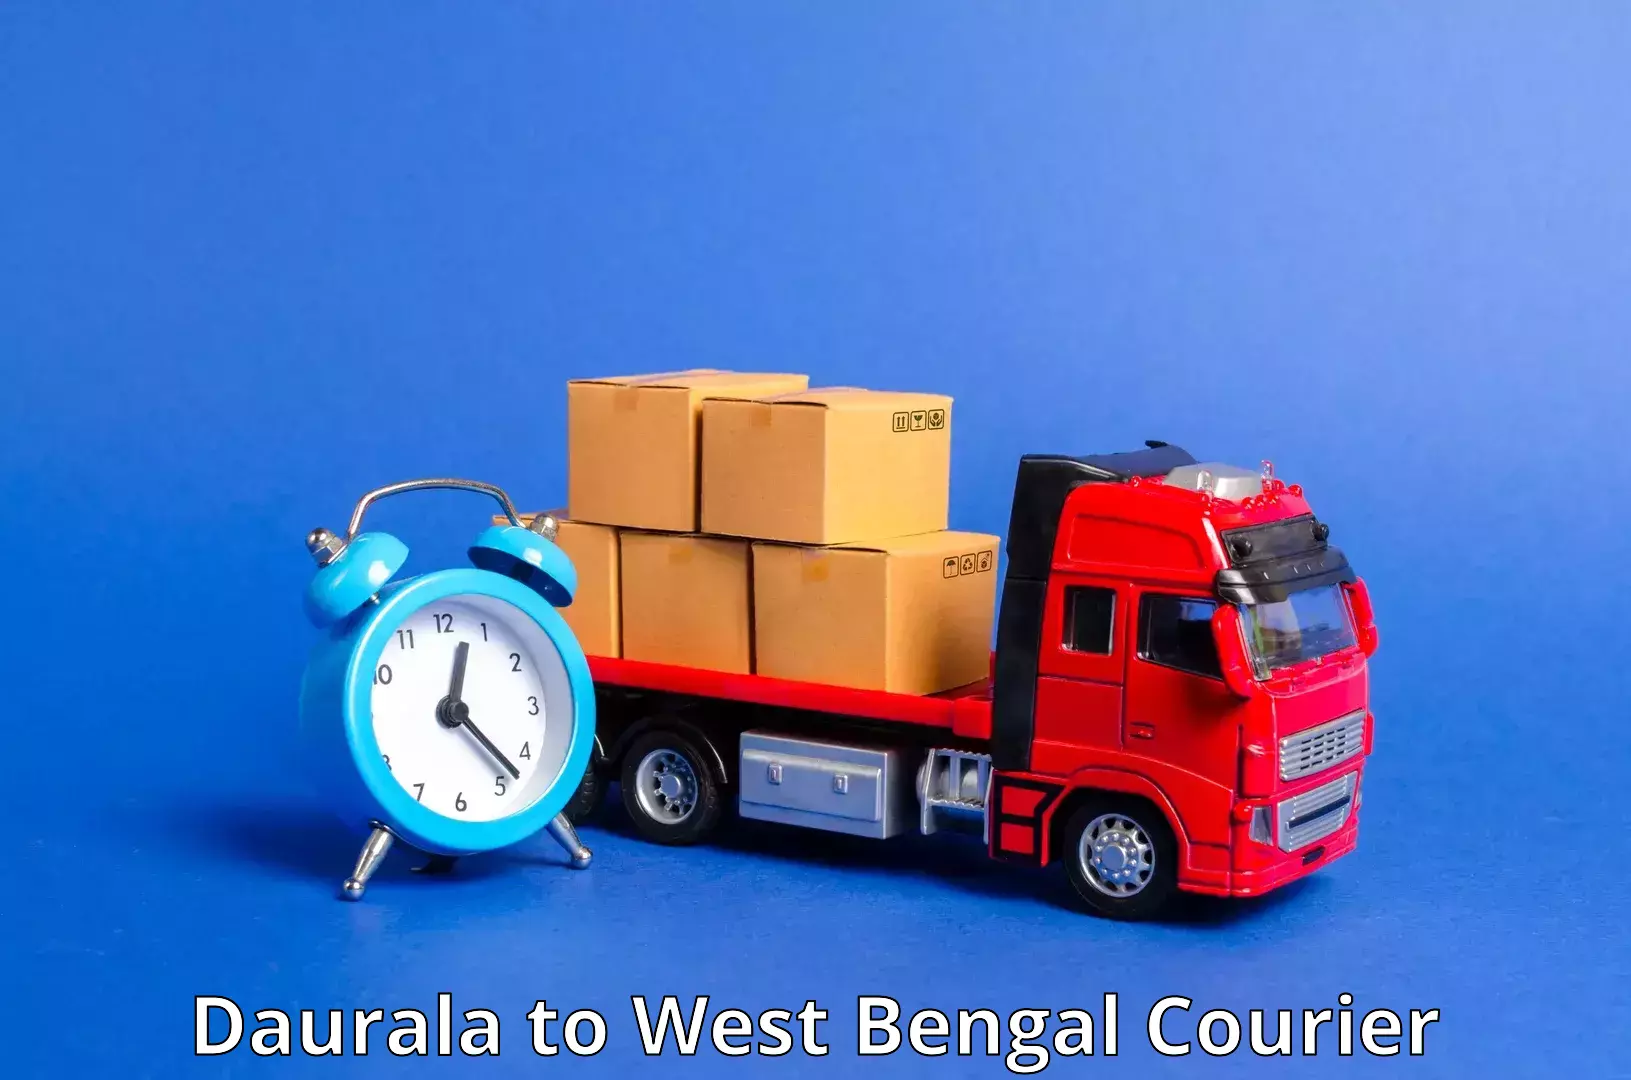 Weekend courier service Daurala to West Bengal